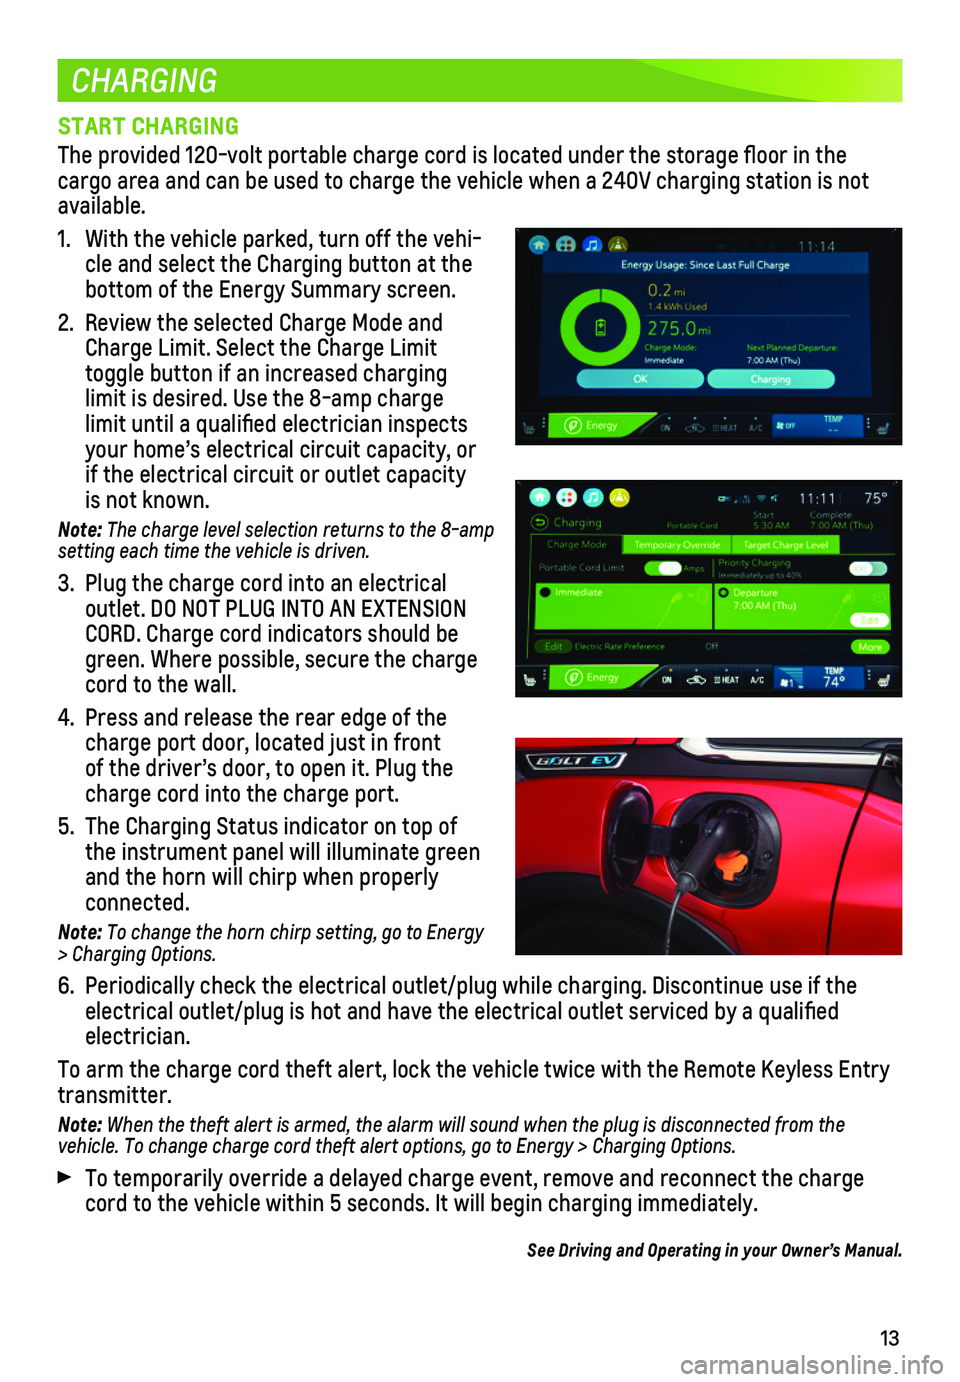 CHEVROLET BOLT EV 2020  Get To Know Guide 13
CHARGING
START CHARGING
The provided 120-volt portable charge cord is located under the storage \
floor in the cargo area and can be used to charge the vehicle when a 240V charging st\
ation is not